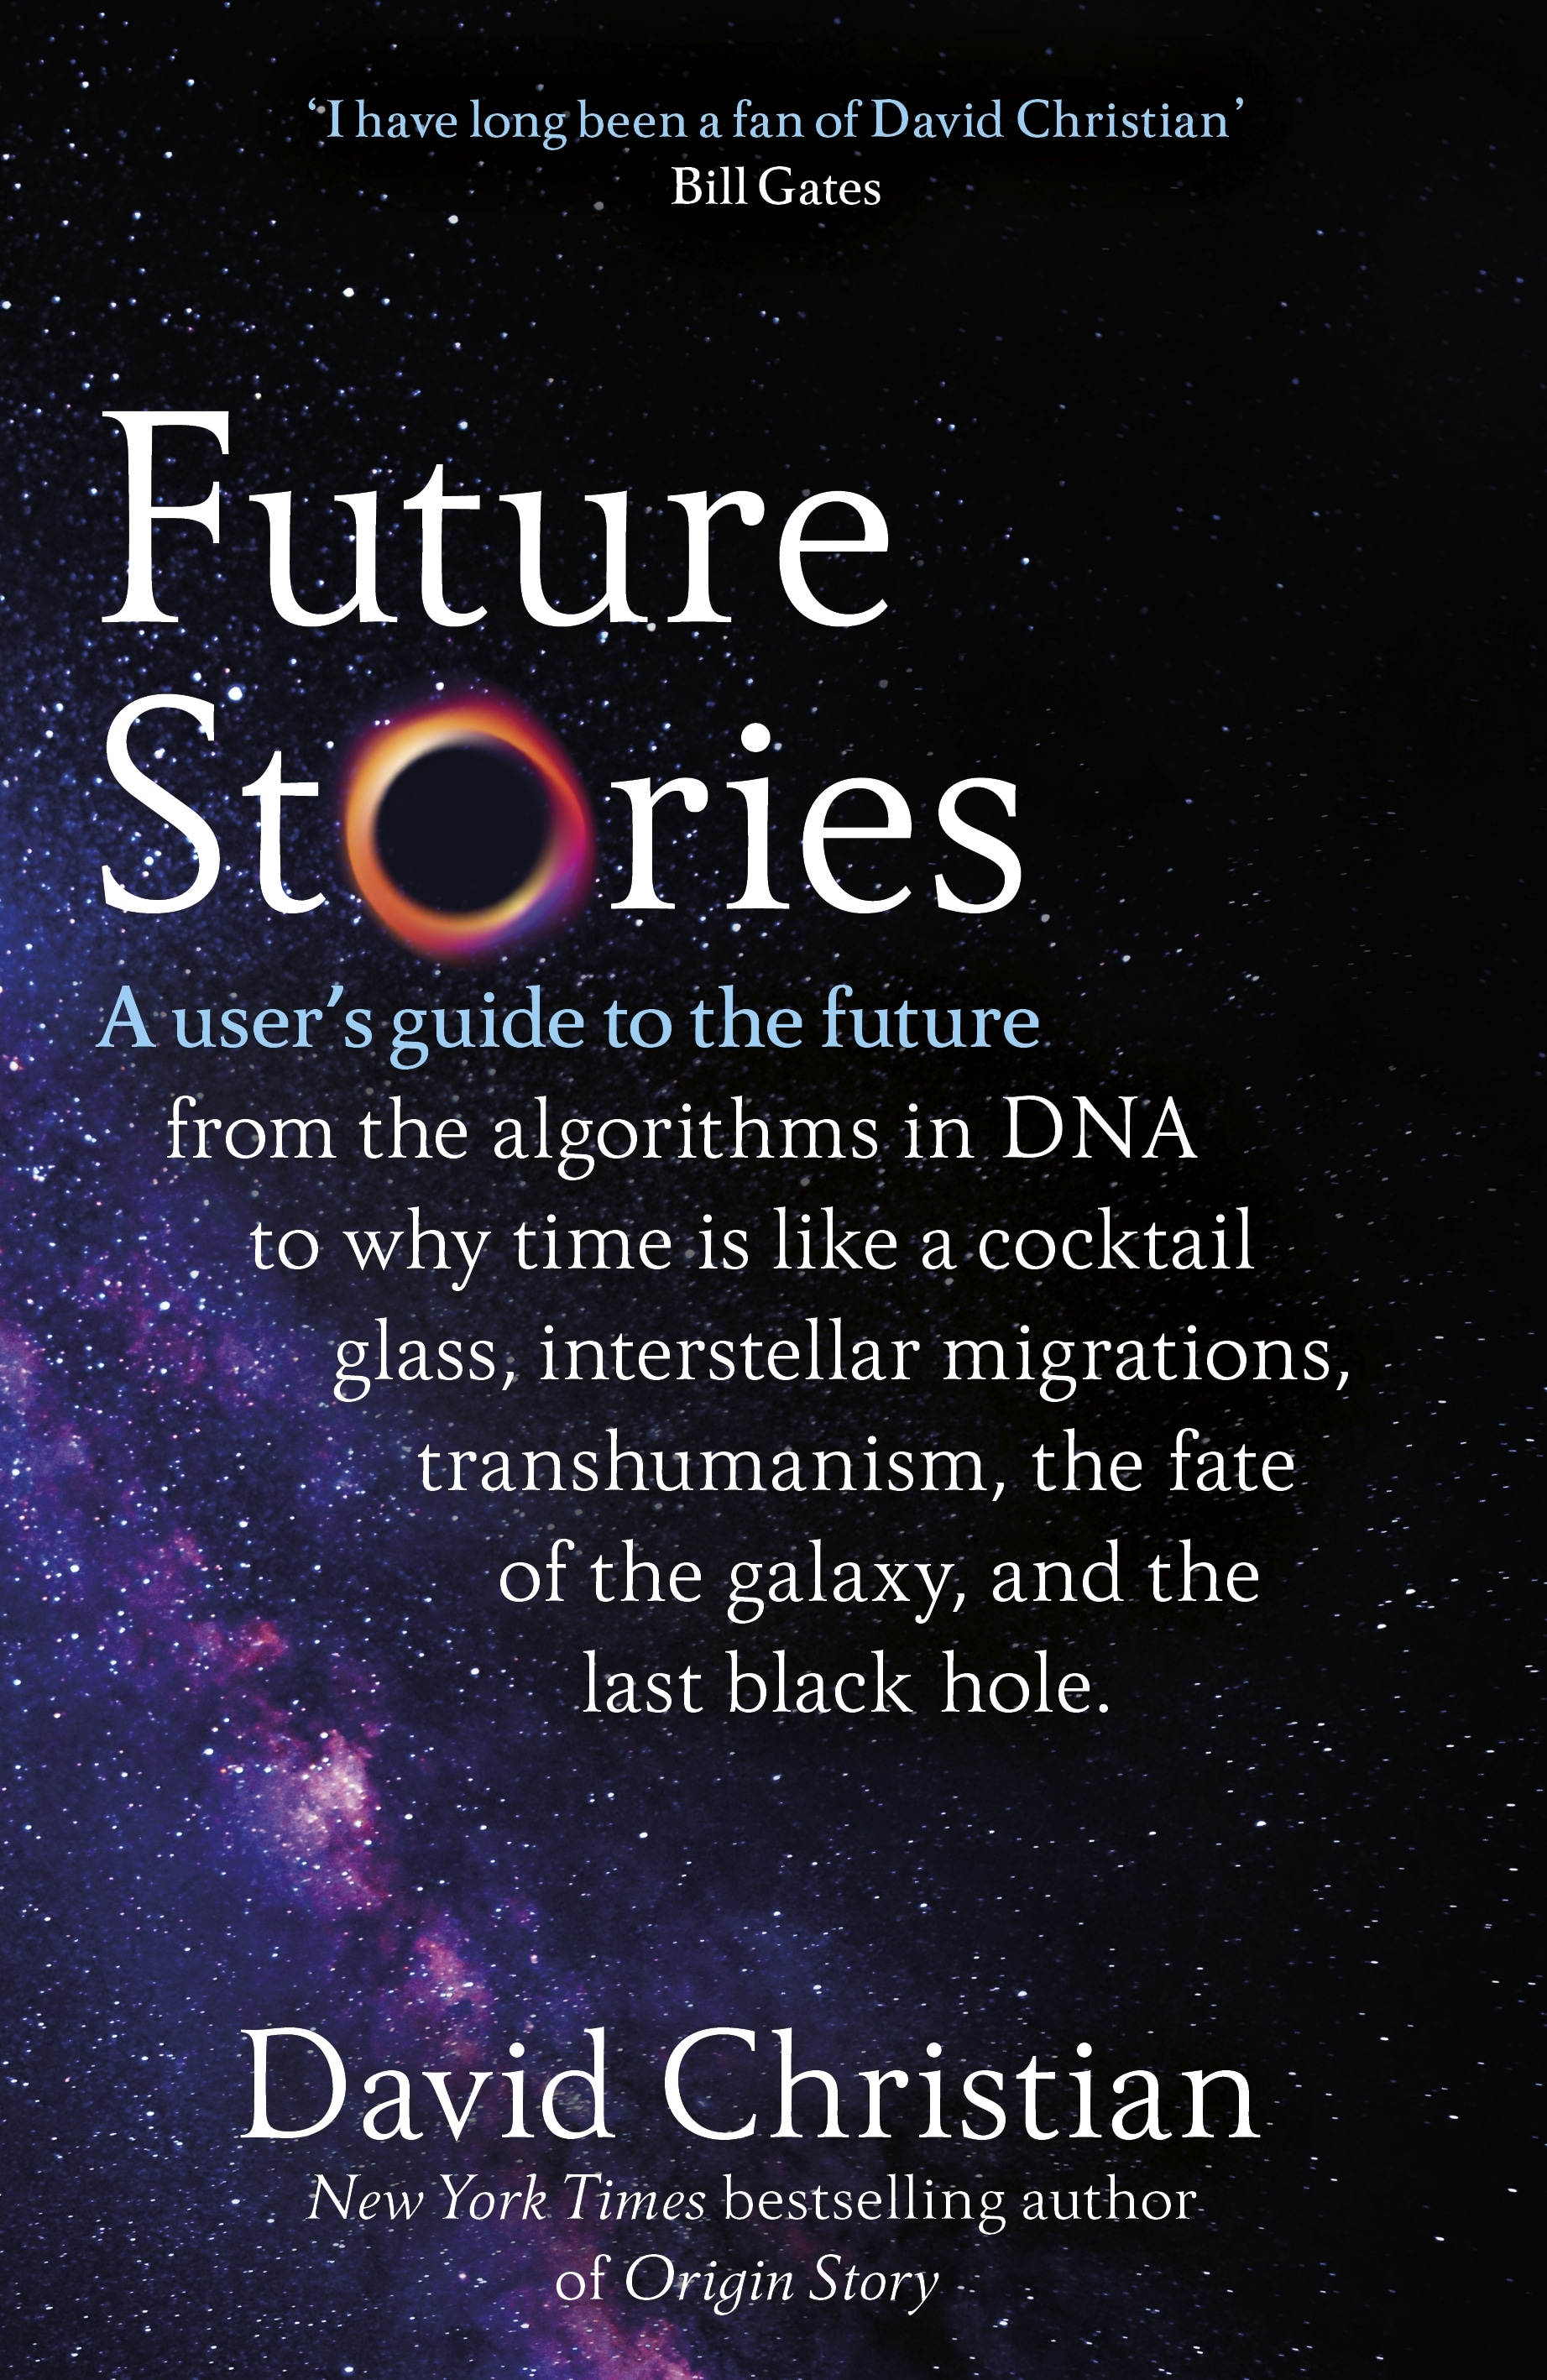 Book “Future Stories” by David Christian — August 25, 2022